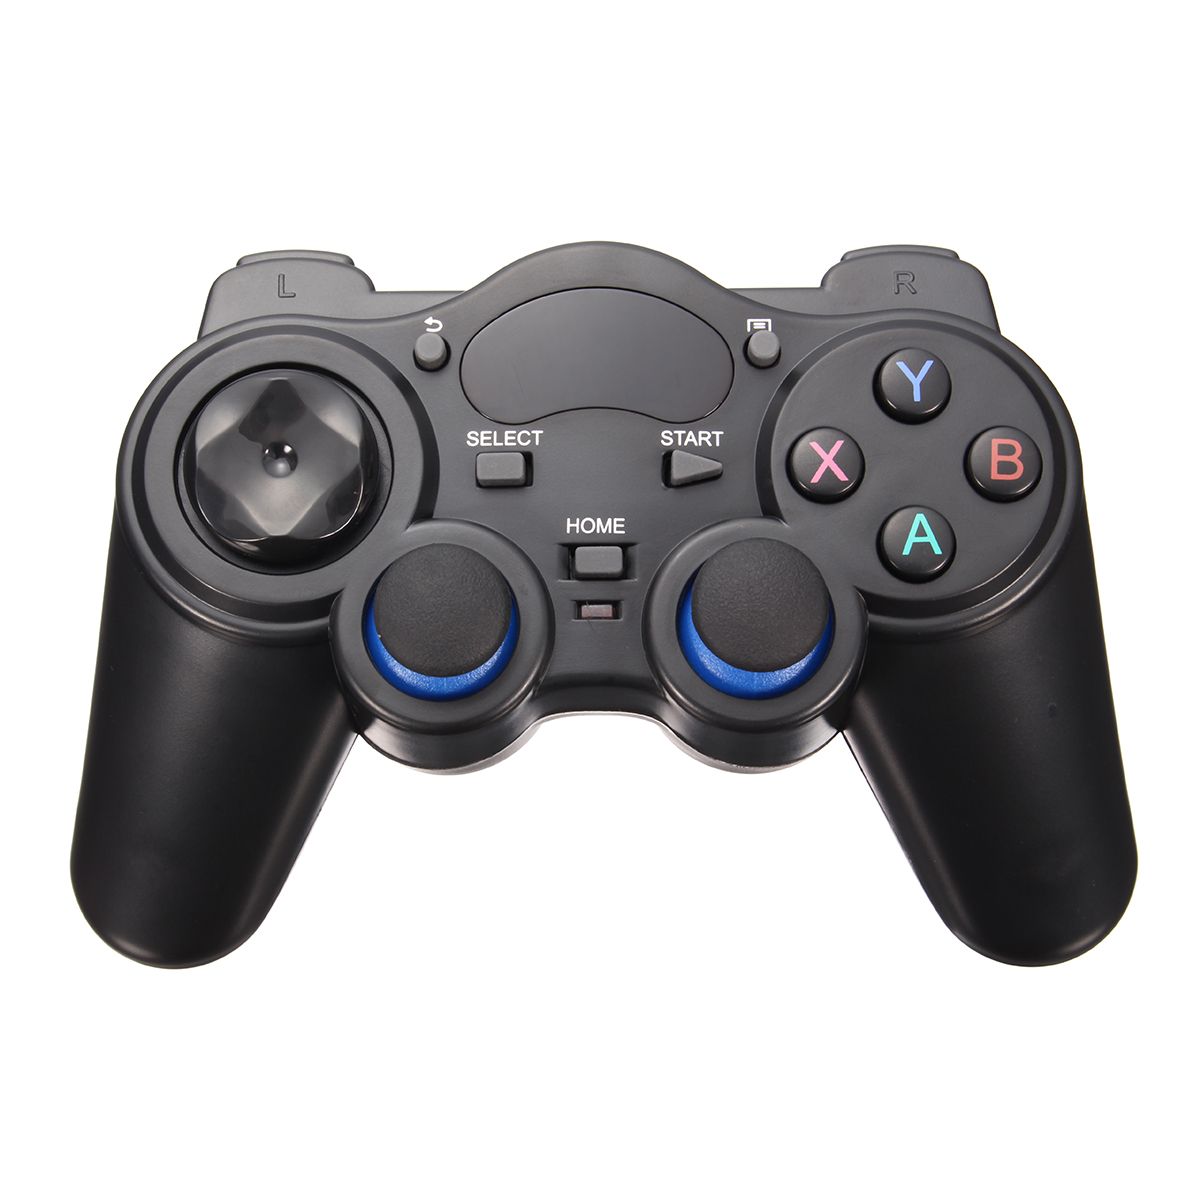 24GHz-Wireless-Game-Controller-Gamepad-Joystick-For-Android-TV-Box-PC-1143410